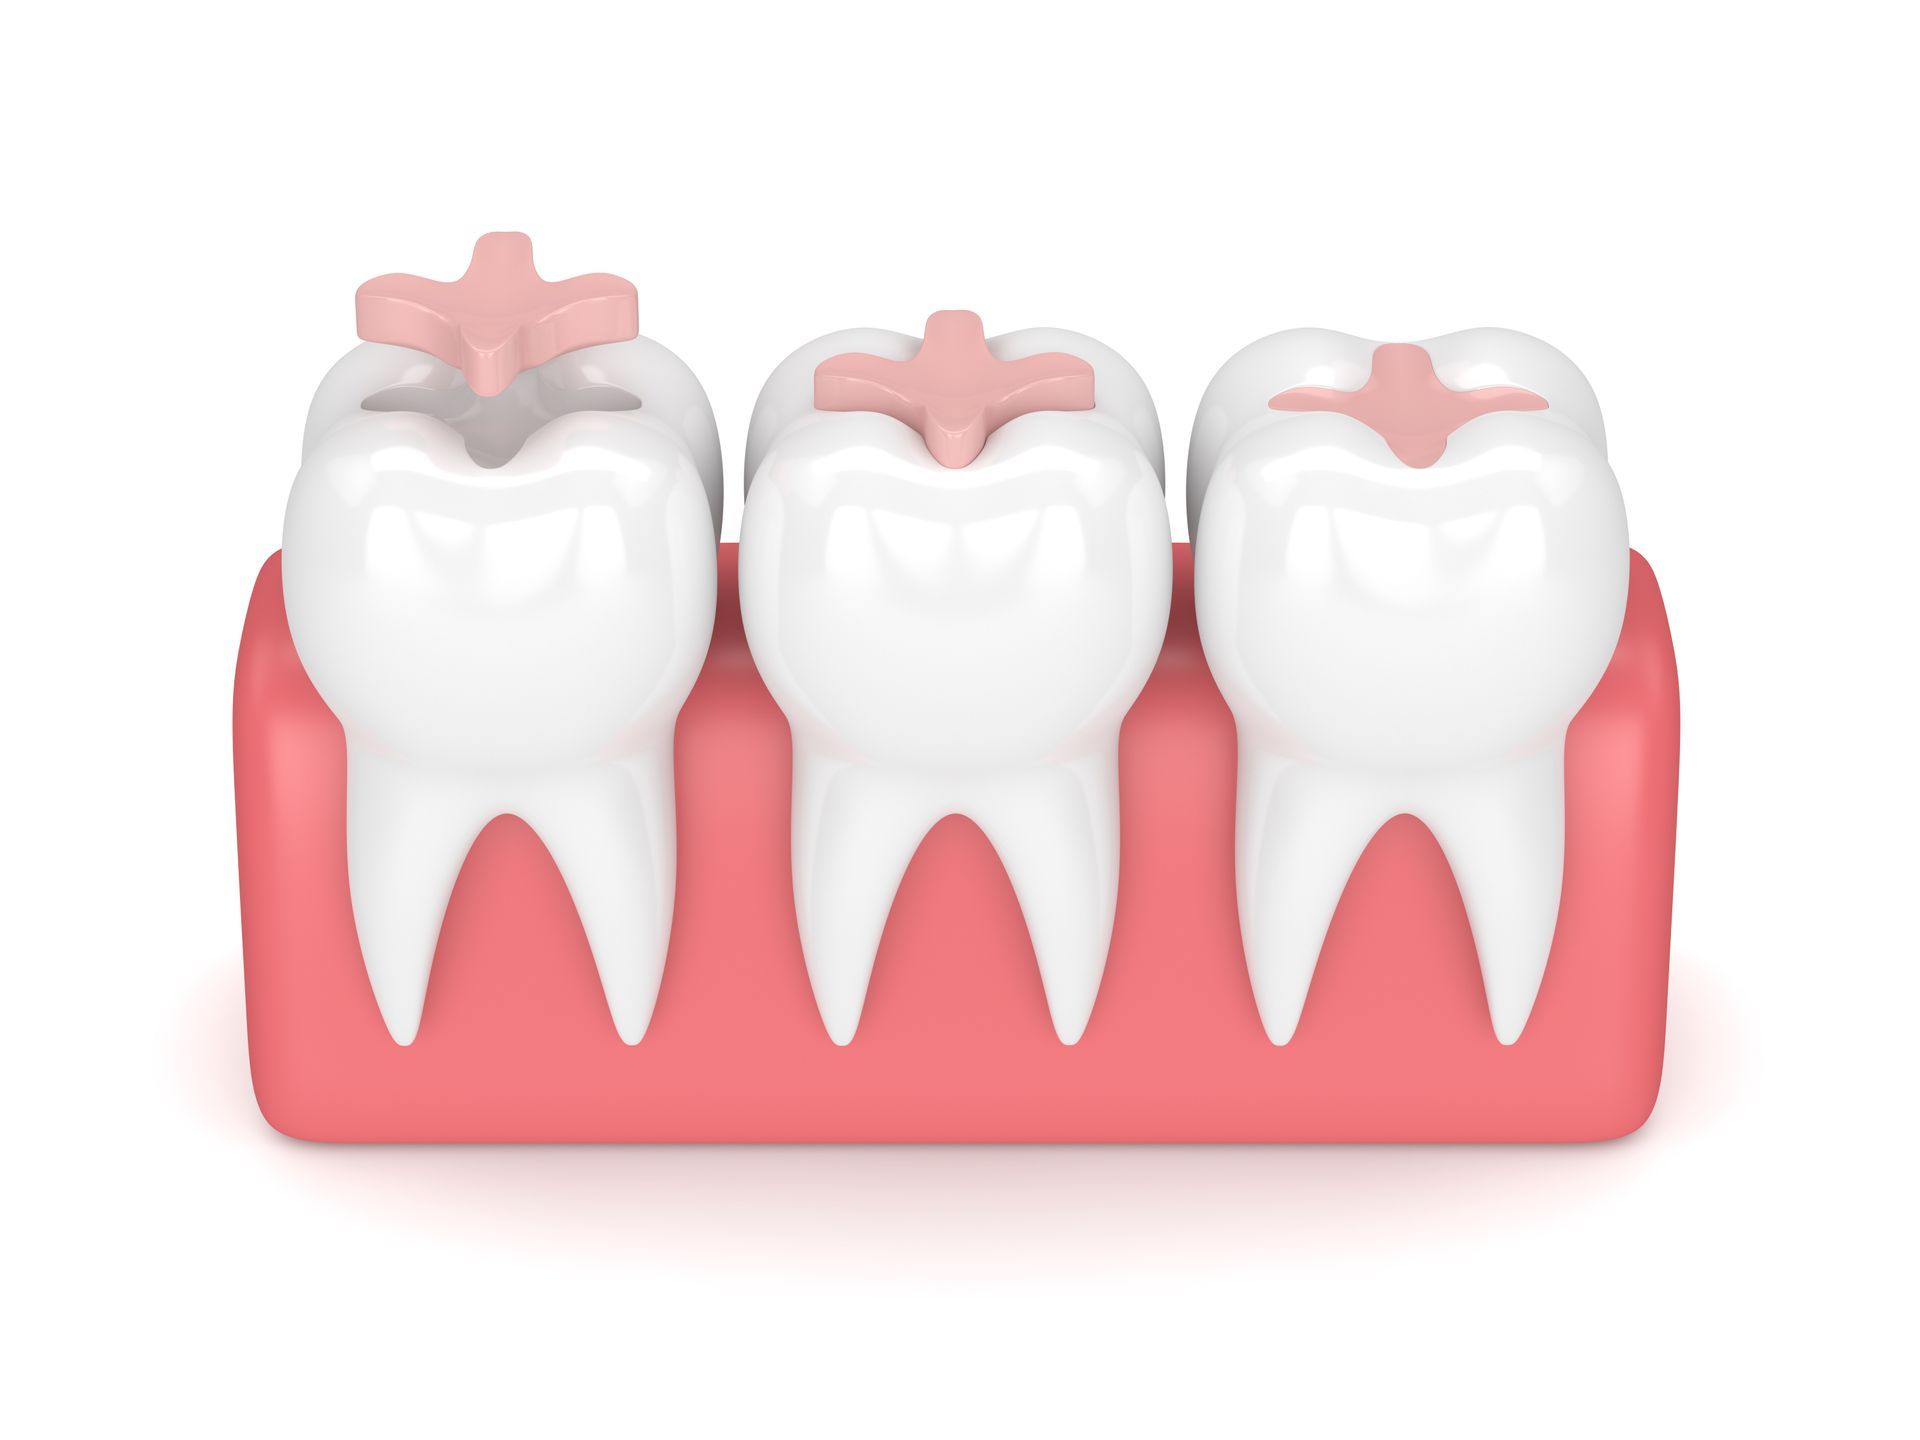 A 3d rendering of a group of teeth with fillings in them.